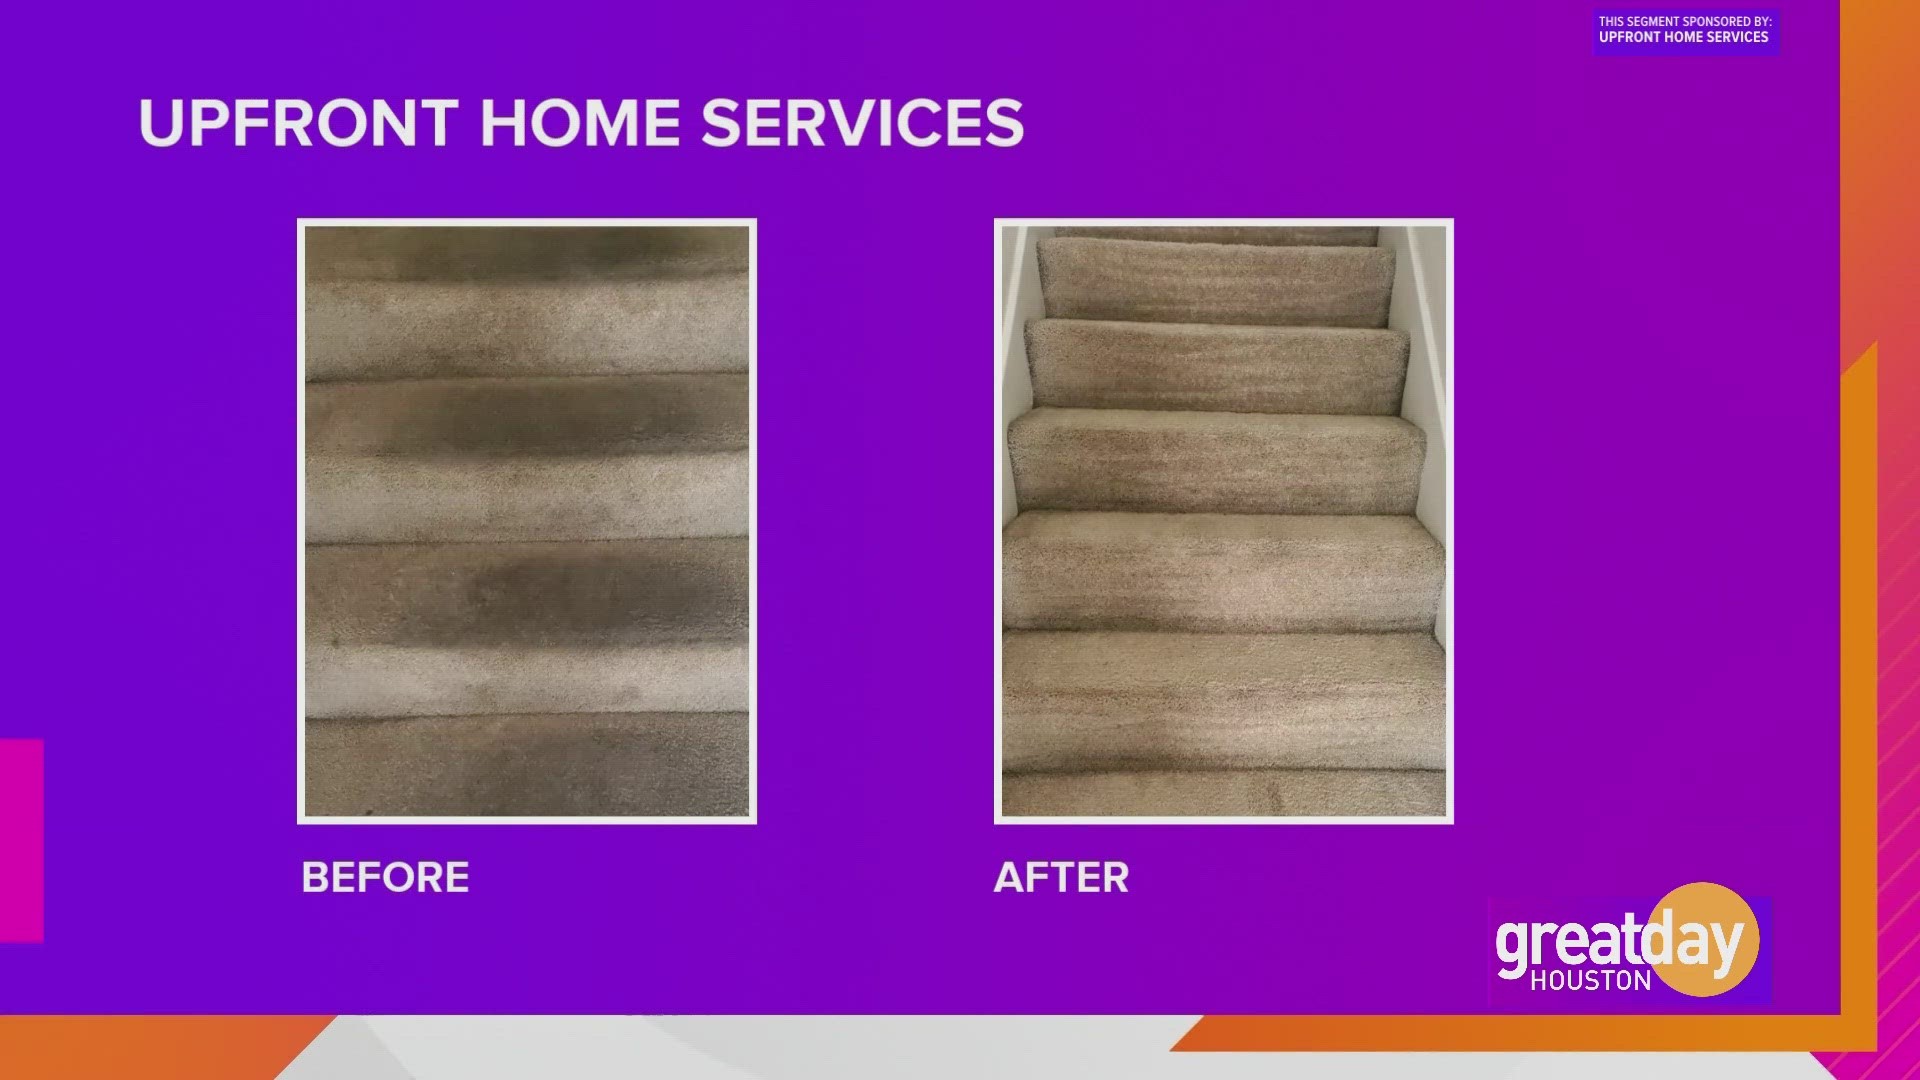 UpFront Home Services has made it their mission to provide customers with honest pricing and quality cleaning services.